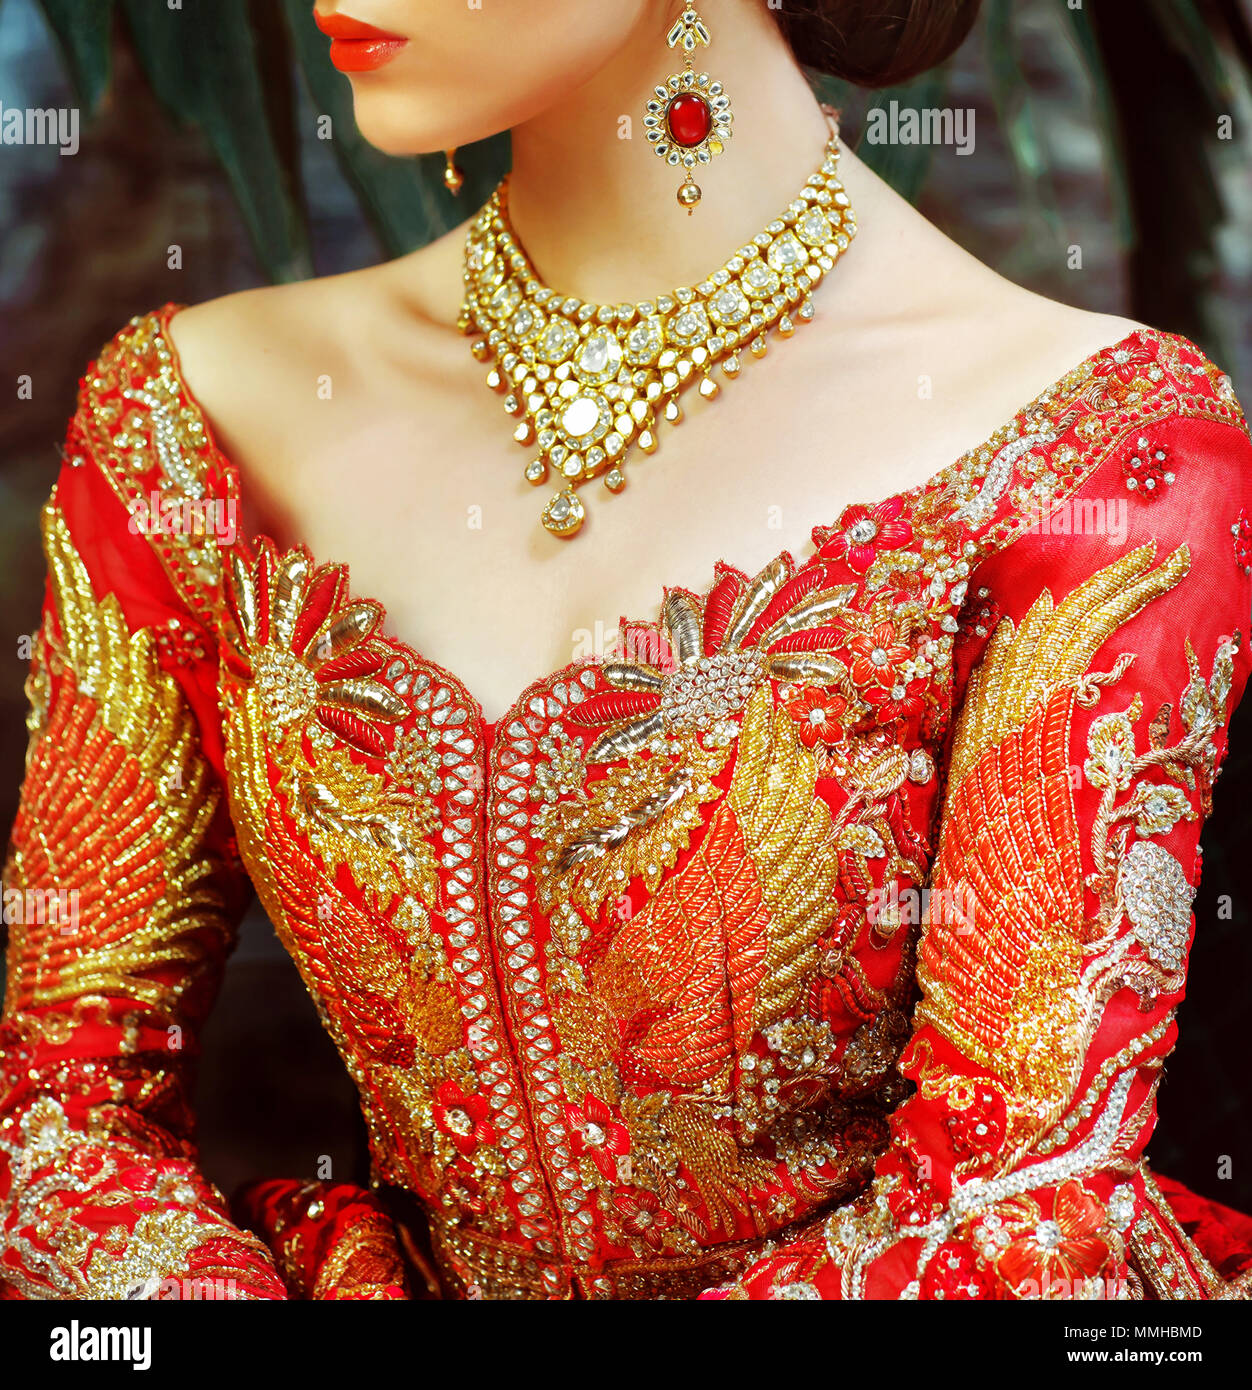 Pakistani and Indian women fashion model showing wedding dress and necklace or earrings Stock Photo